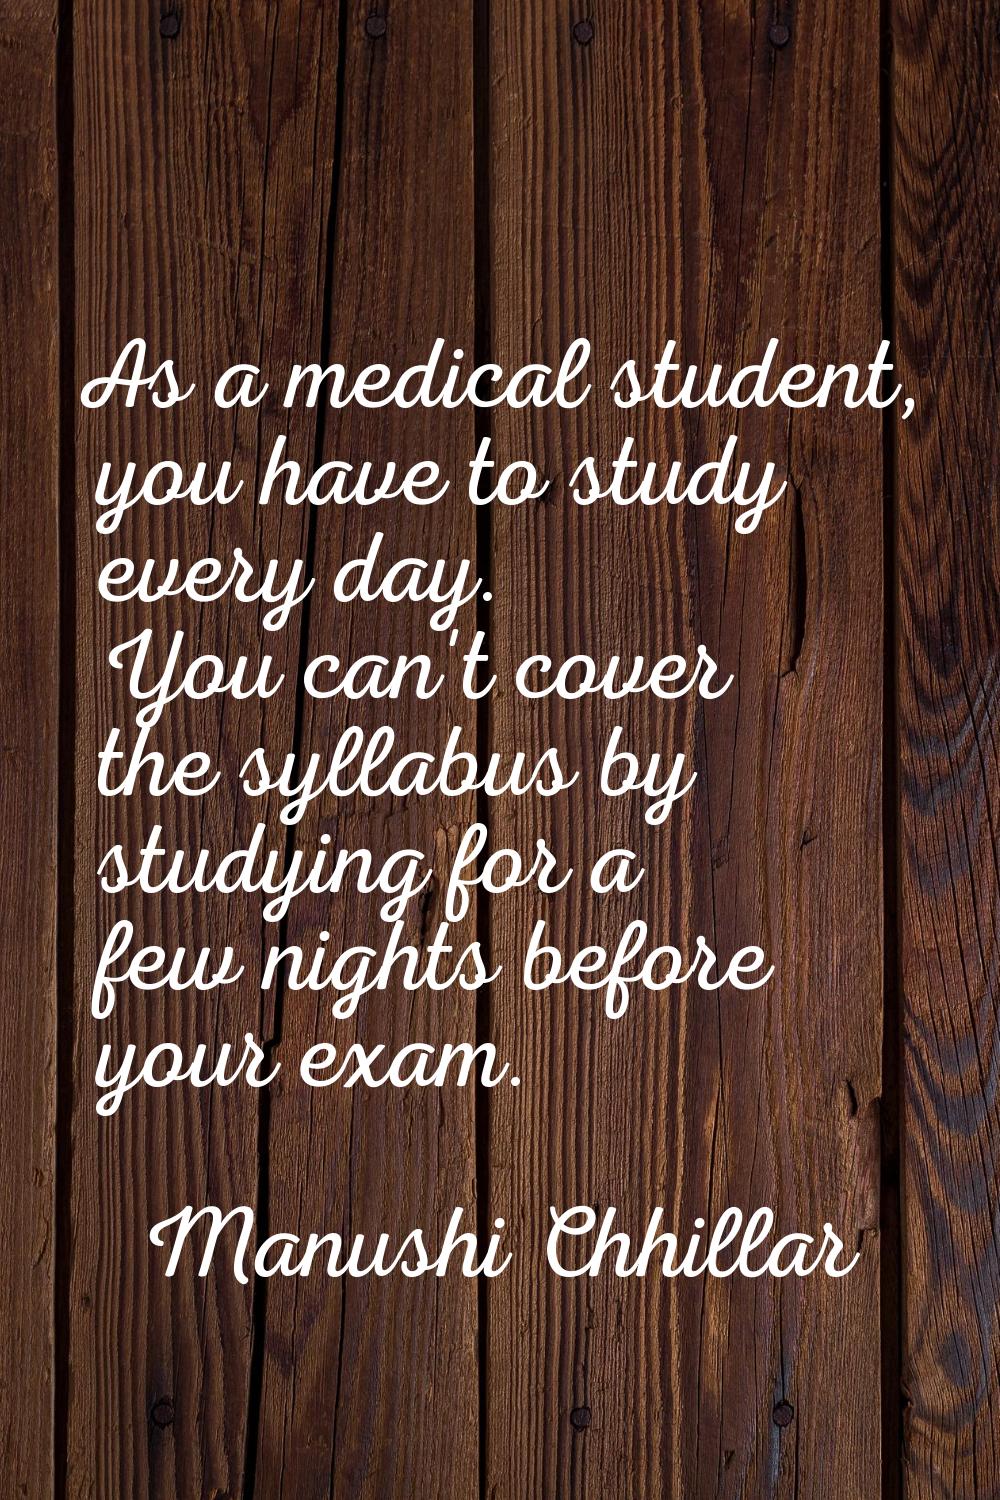 As a medical student, you have to study every day. You can't cover the syllabus by studying for a f